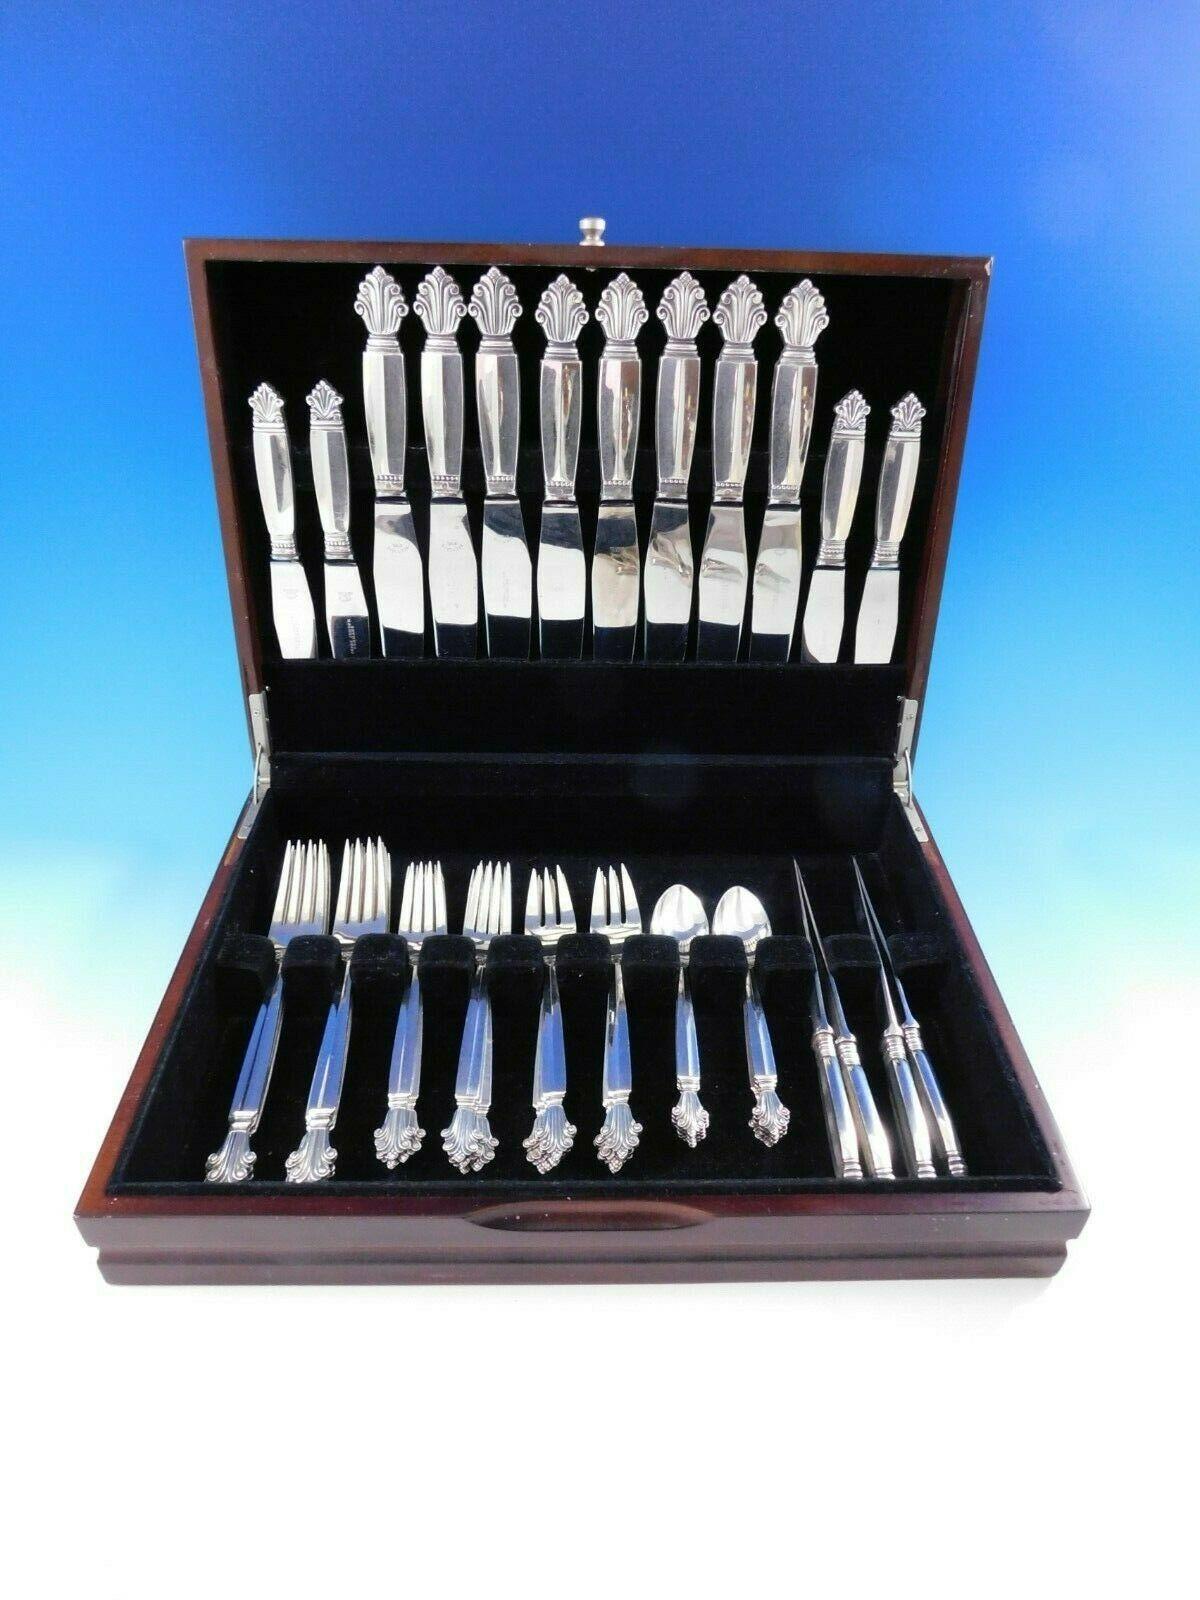 Exceptional acanthus by Georg Jensen Danish sterling silver flatware set, 48 pieces. This set includes:

8 dinner size knives, short handle, 10